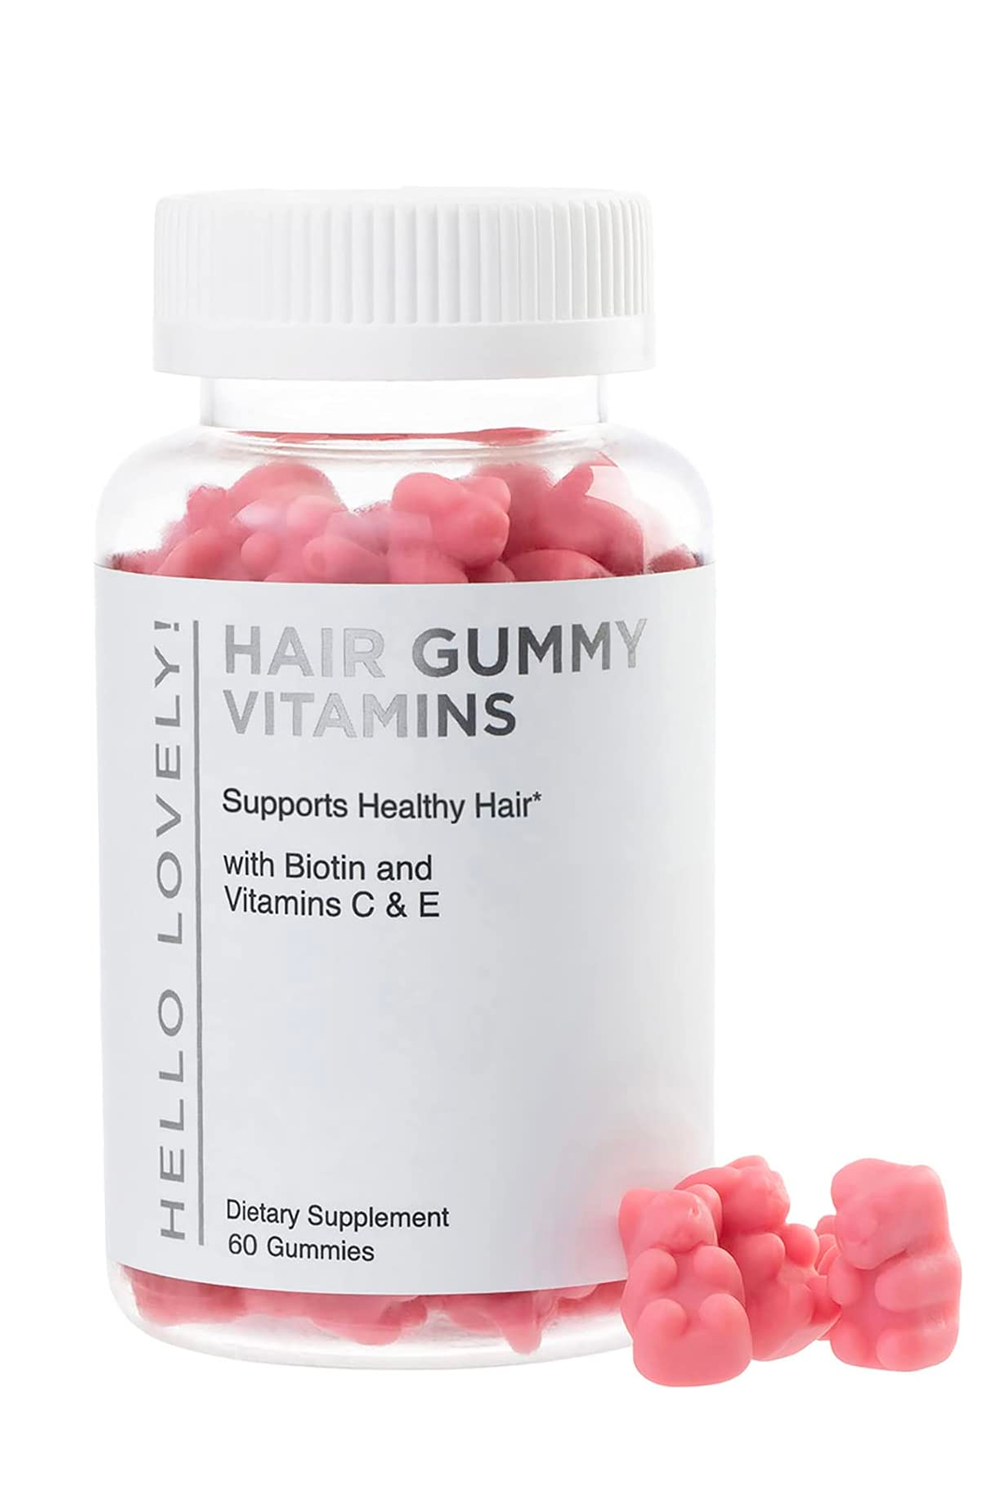 Do Vitamins for Hair Growth Work: 20 Best Hair Loss Supplements